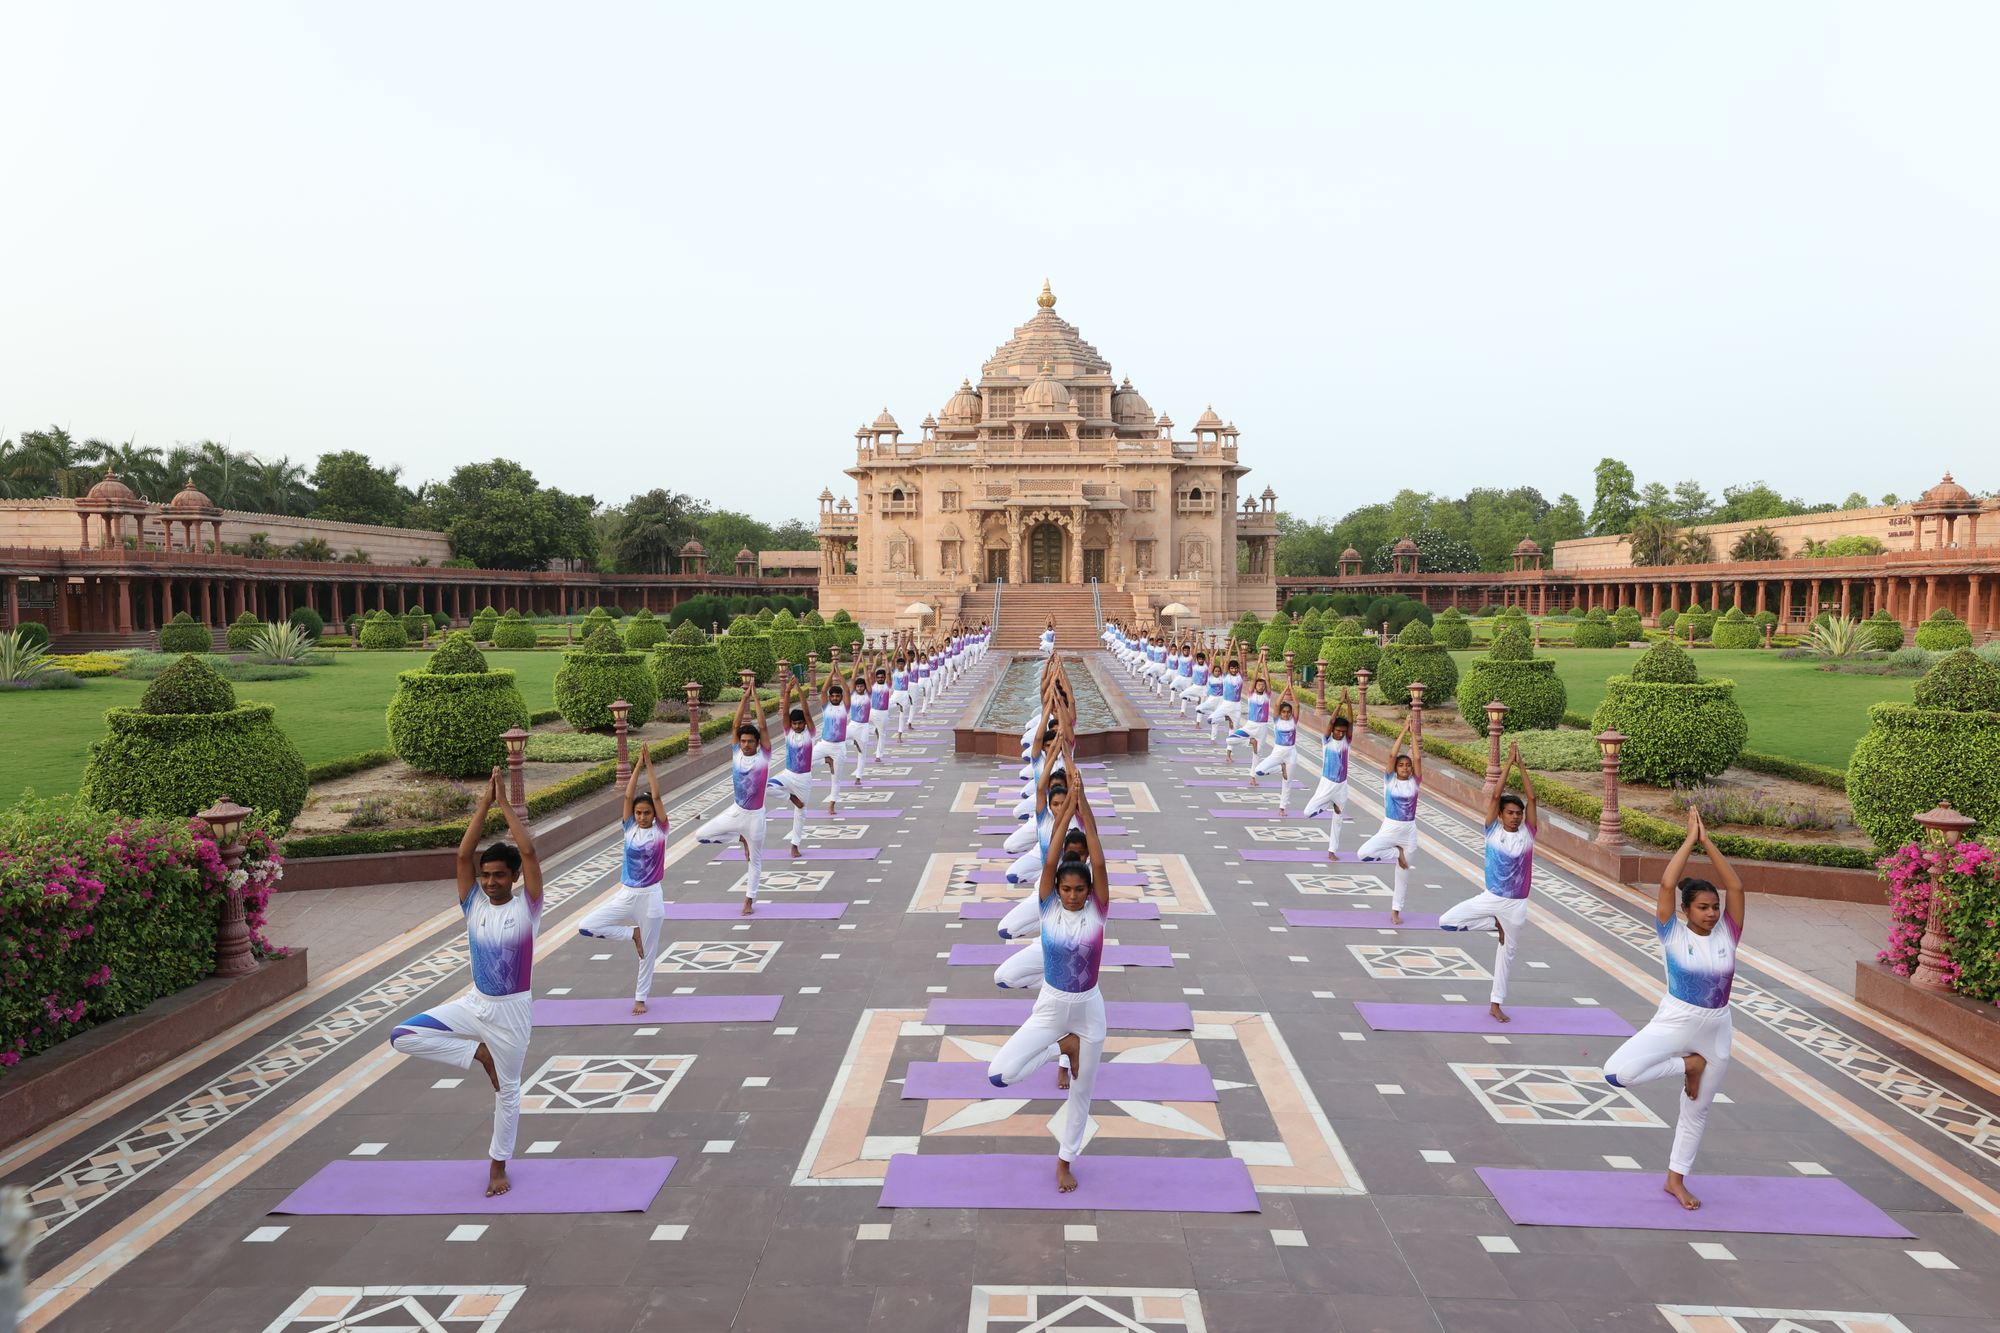 A Unique Way to Celebrate Int’l Yoga Day